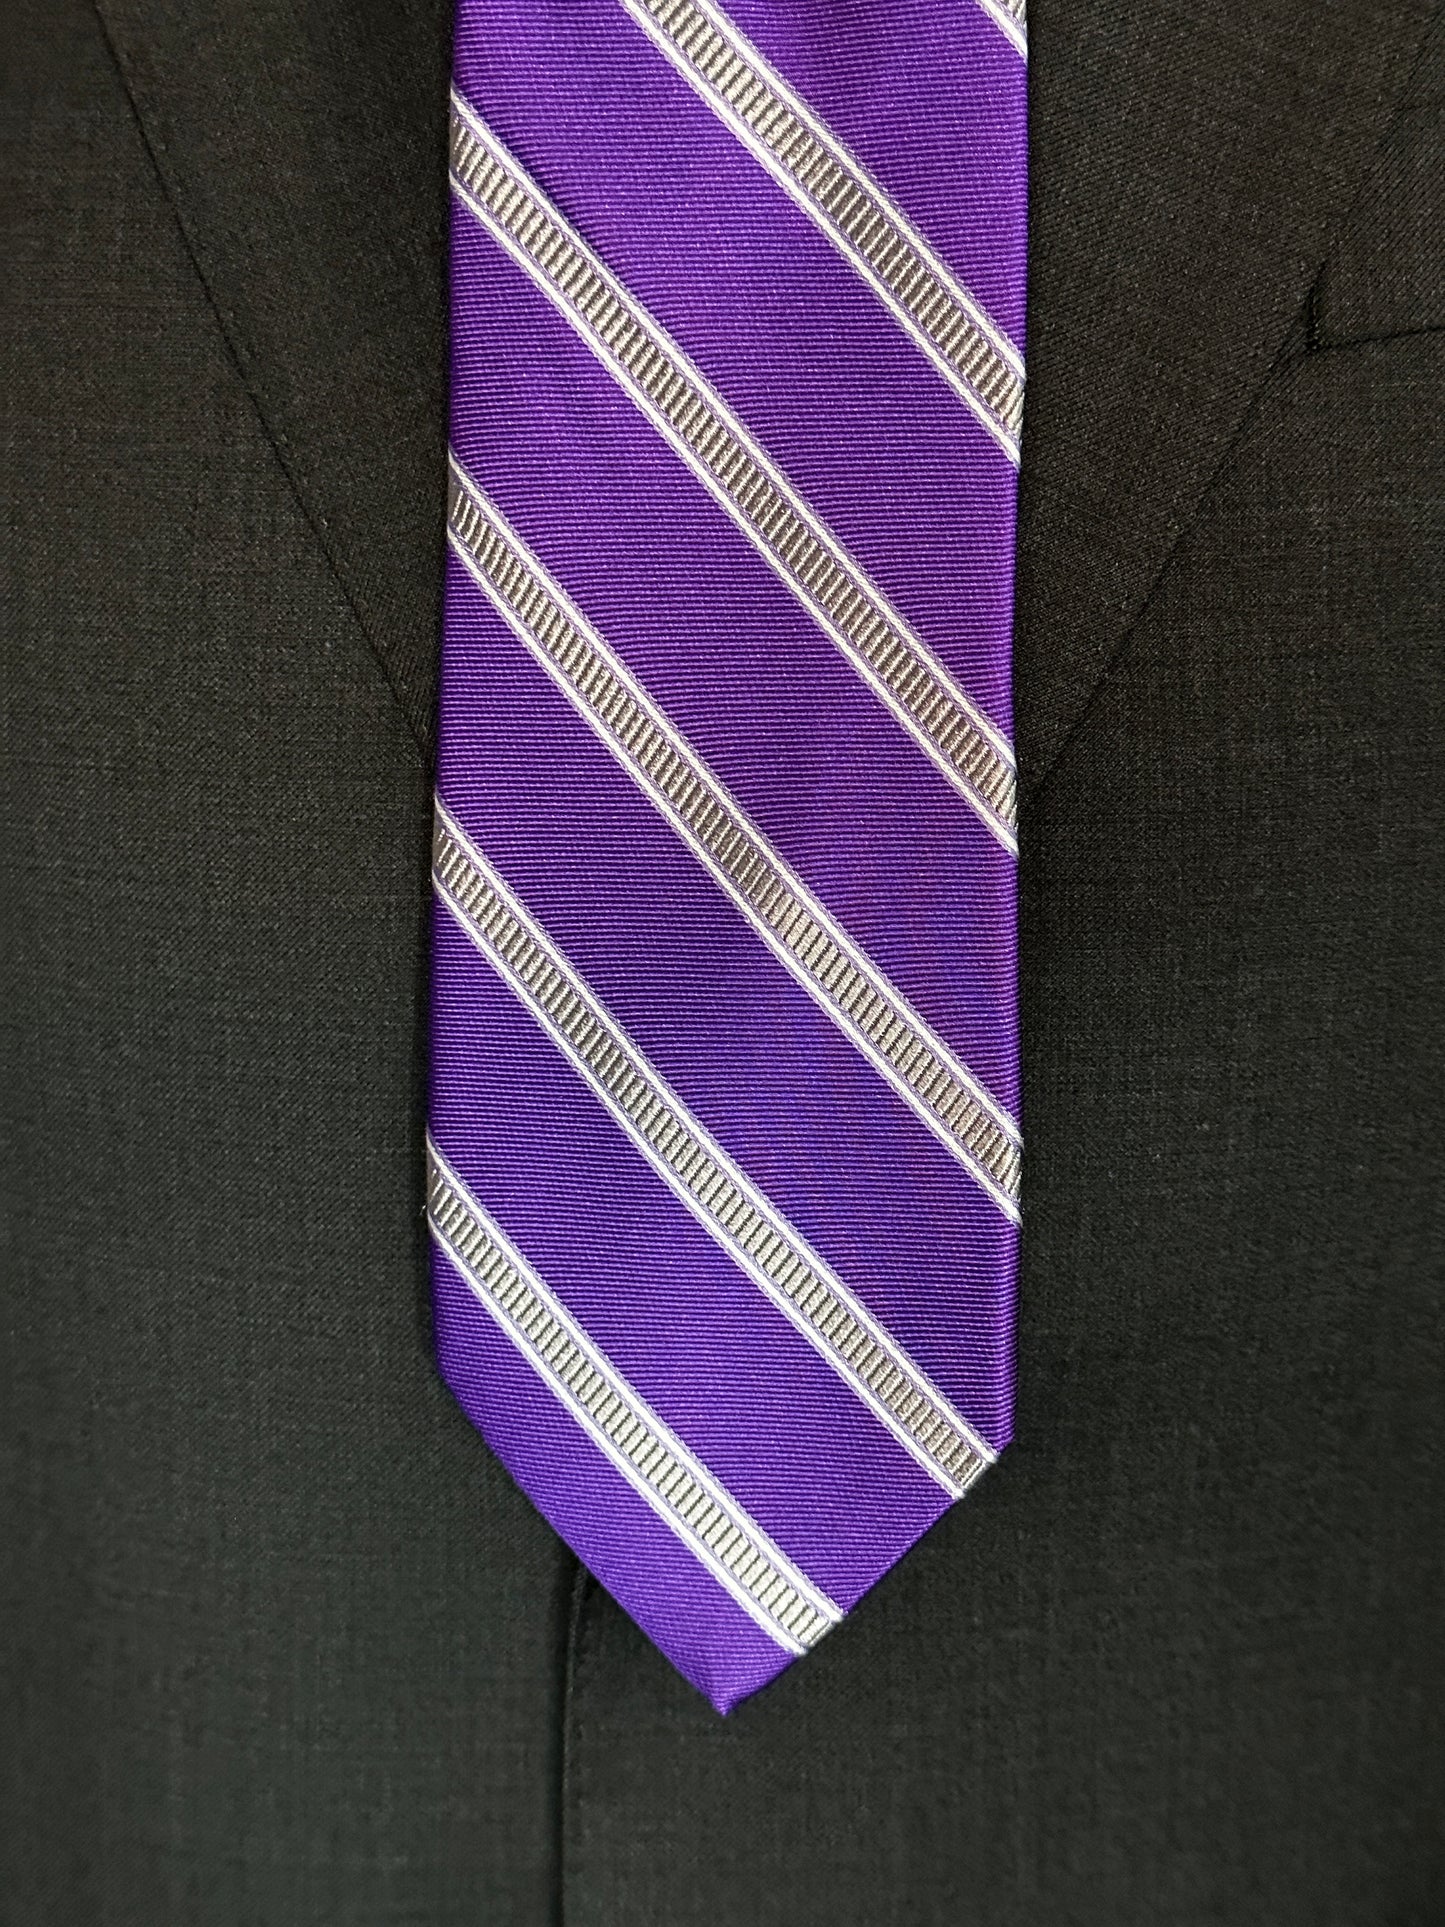 This beautiful deep purple woven silk tie with stone grey stripe pairs perfectly with a soft charcoal grey suit or navy pinstripe. For summer it would also go well with the classic tan summer suit. Try it with a navy blazer and pale grey trousers for a mid afternoon summer look.